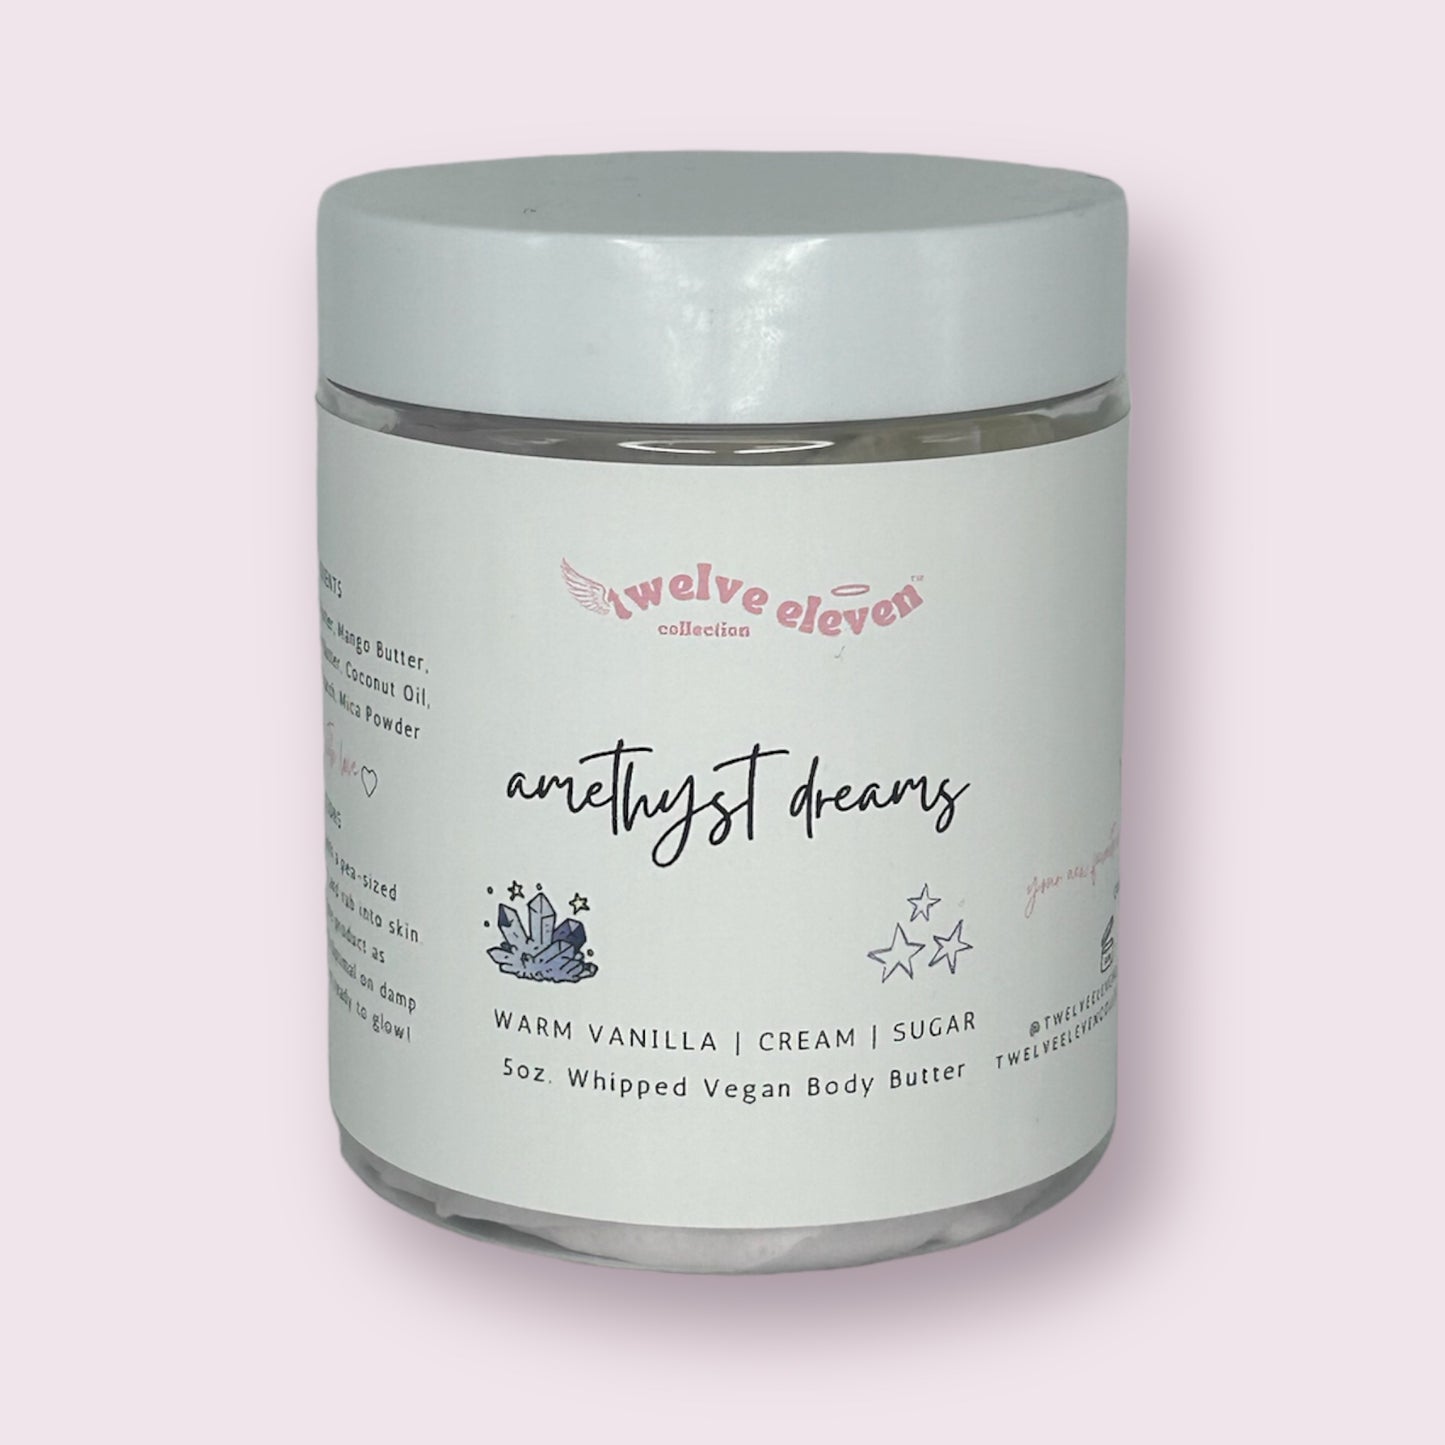 Amethyst Dreams Whipped Body Butter